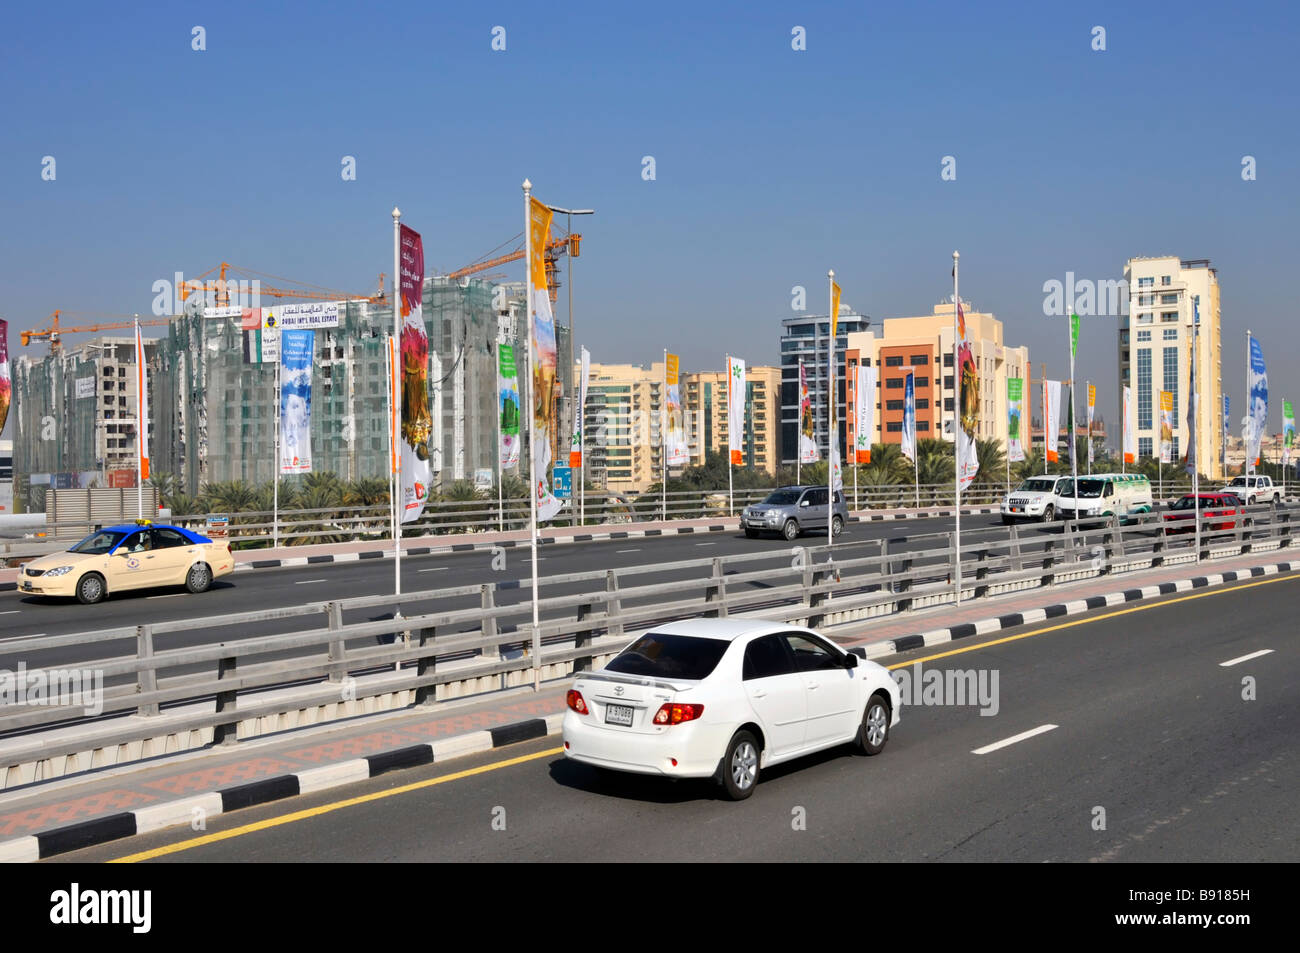 Dubai urban landscape looking down view from above modern motorway highway transport infrastructure with free flowing traffic United Arab Emirates UAE Stock Photo